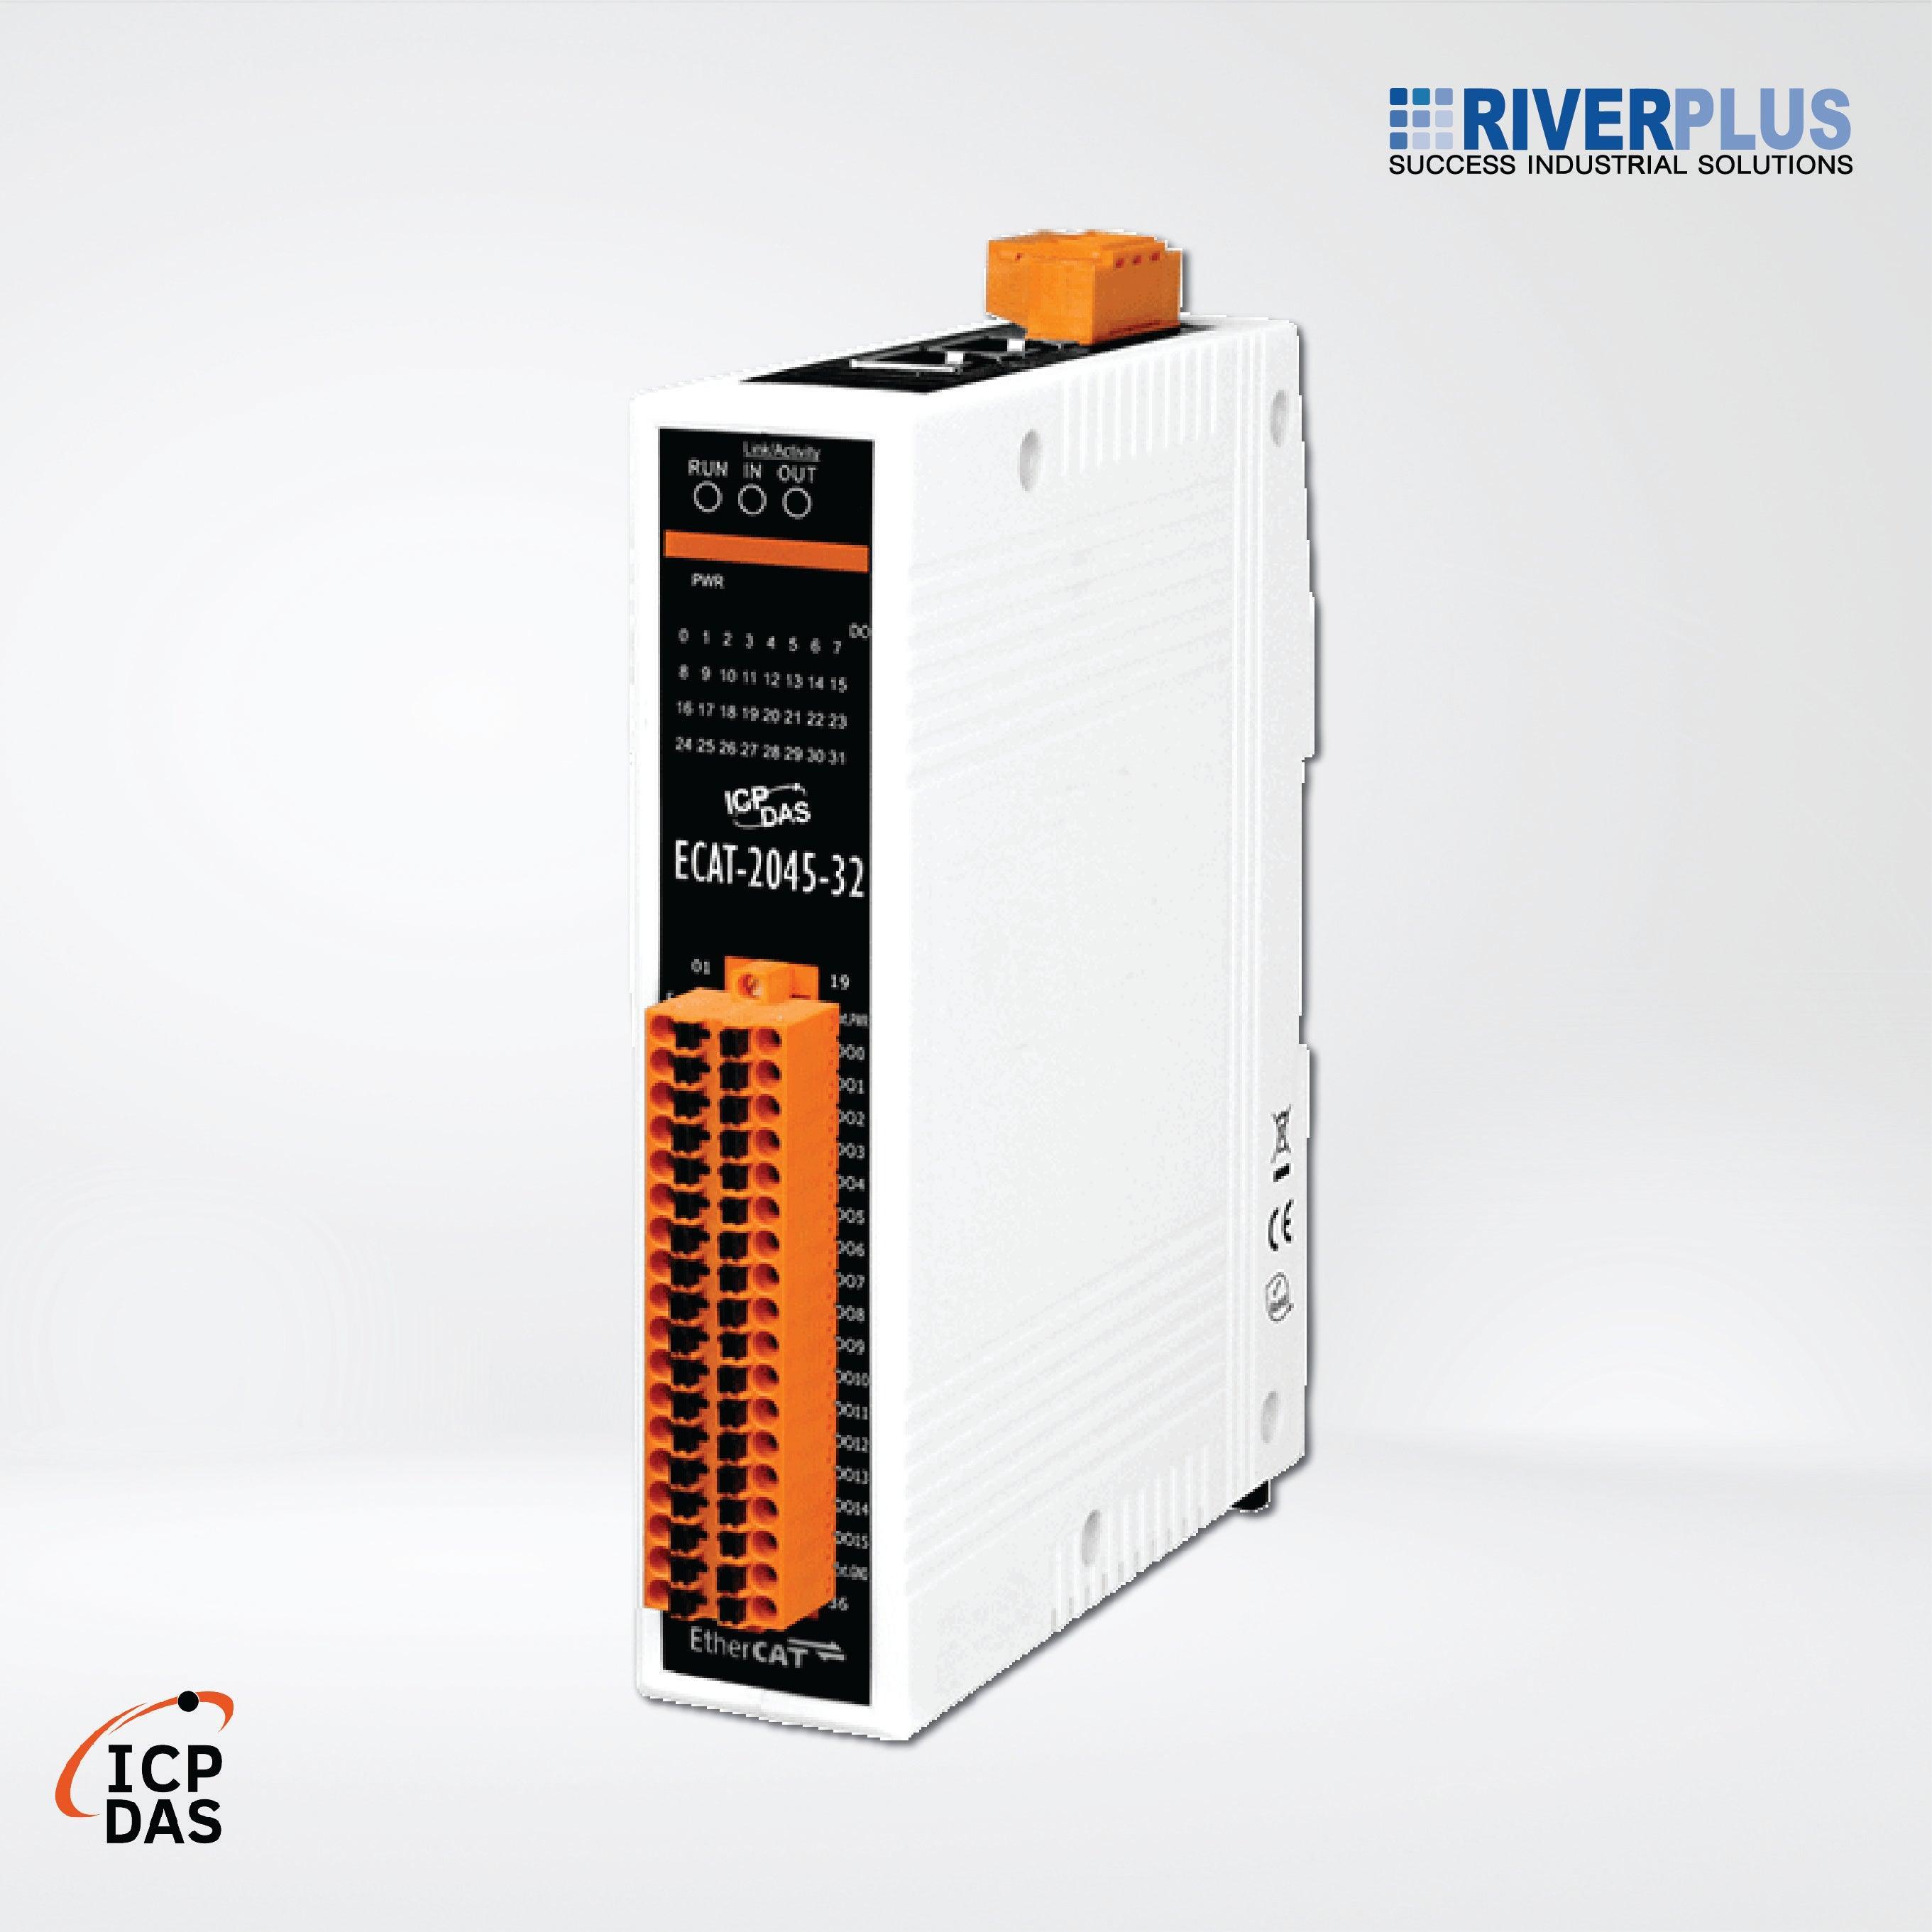 ECAT-2045-32 EtherCAT Slave I/O Module with Isolated 32-ch DO - Riverplus